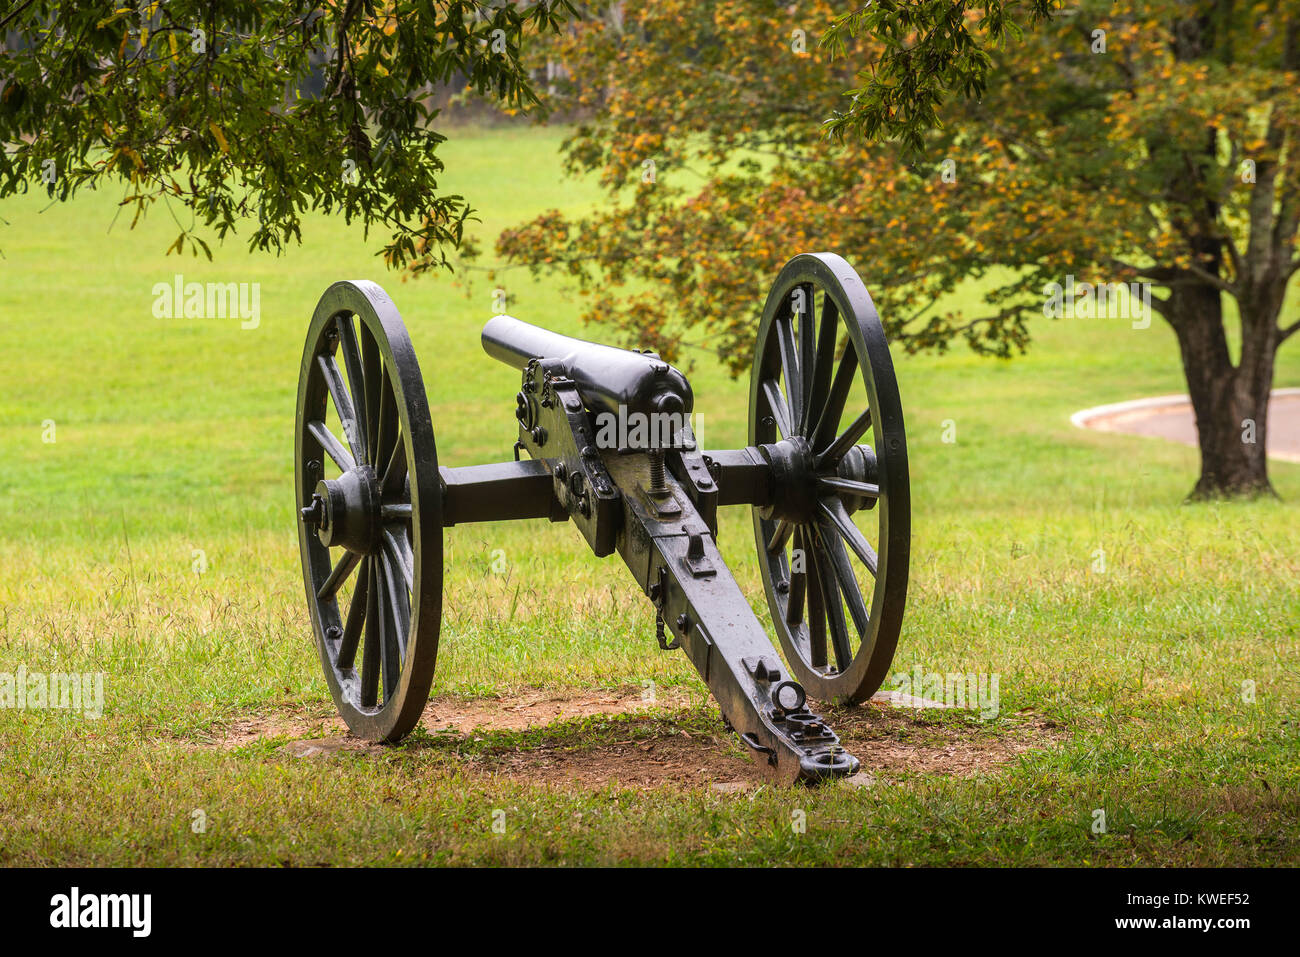 Chickamauga and Chattanooga National Military Park is located in Georgia and Tennessee and was one of the most decisive battles of the Civil War. Stock Photo